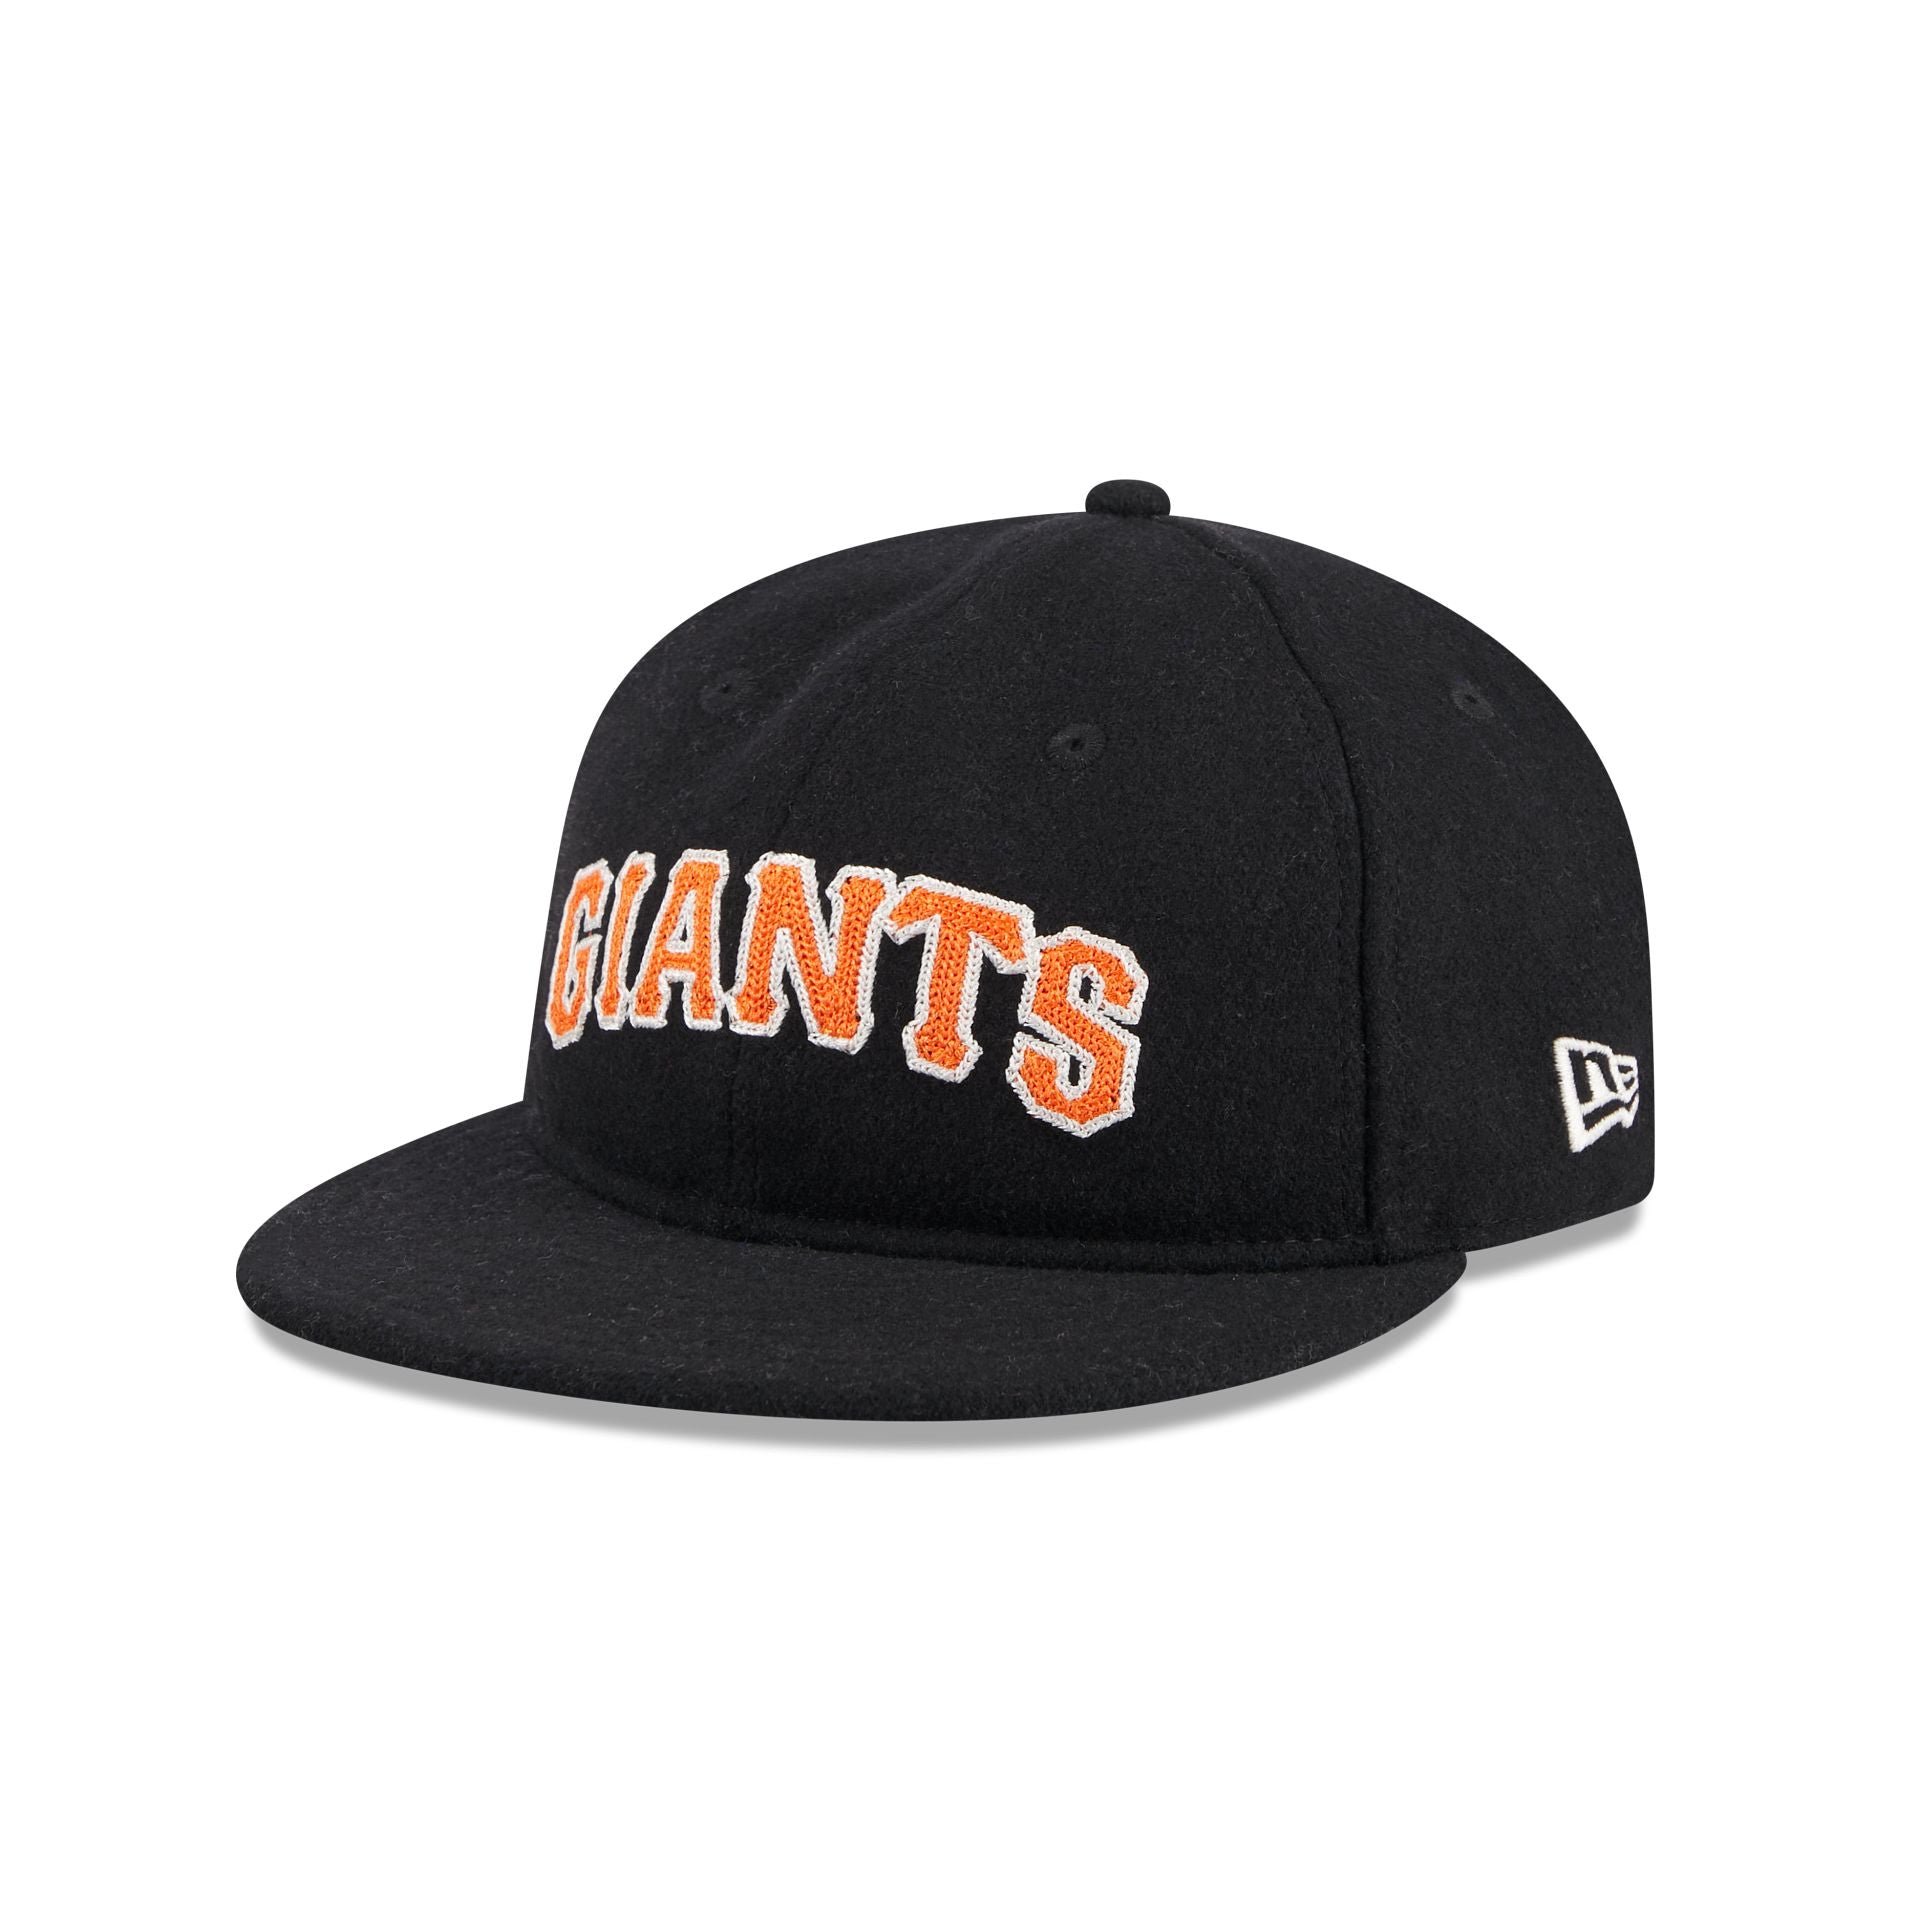 New Era / Men's New York Giants Color Pack 9Fifty White Adjustable Hat